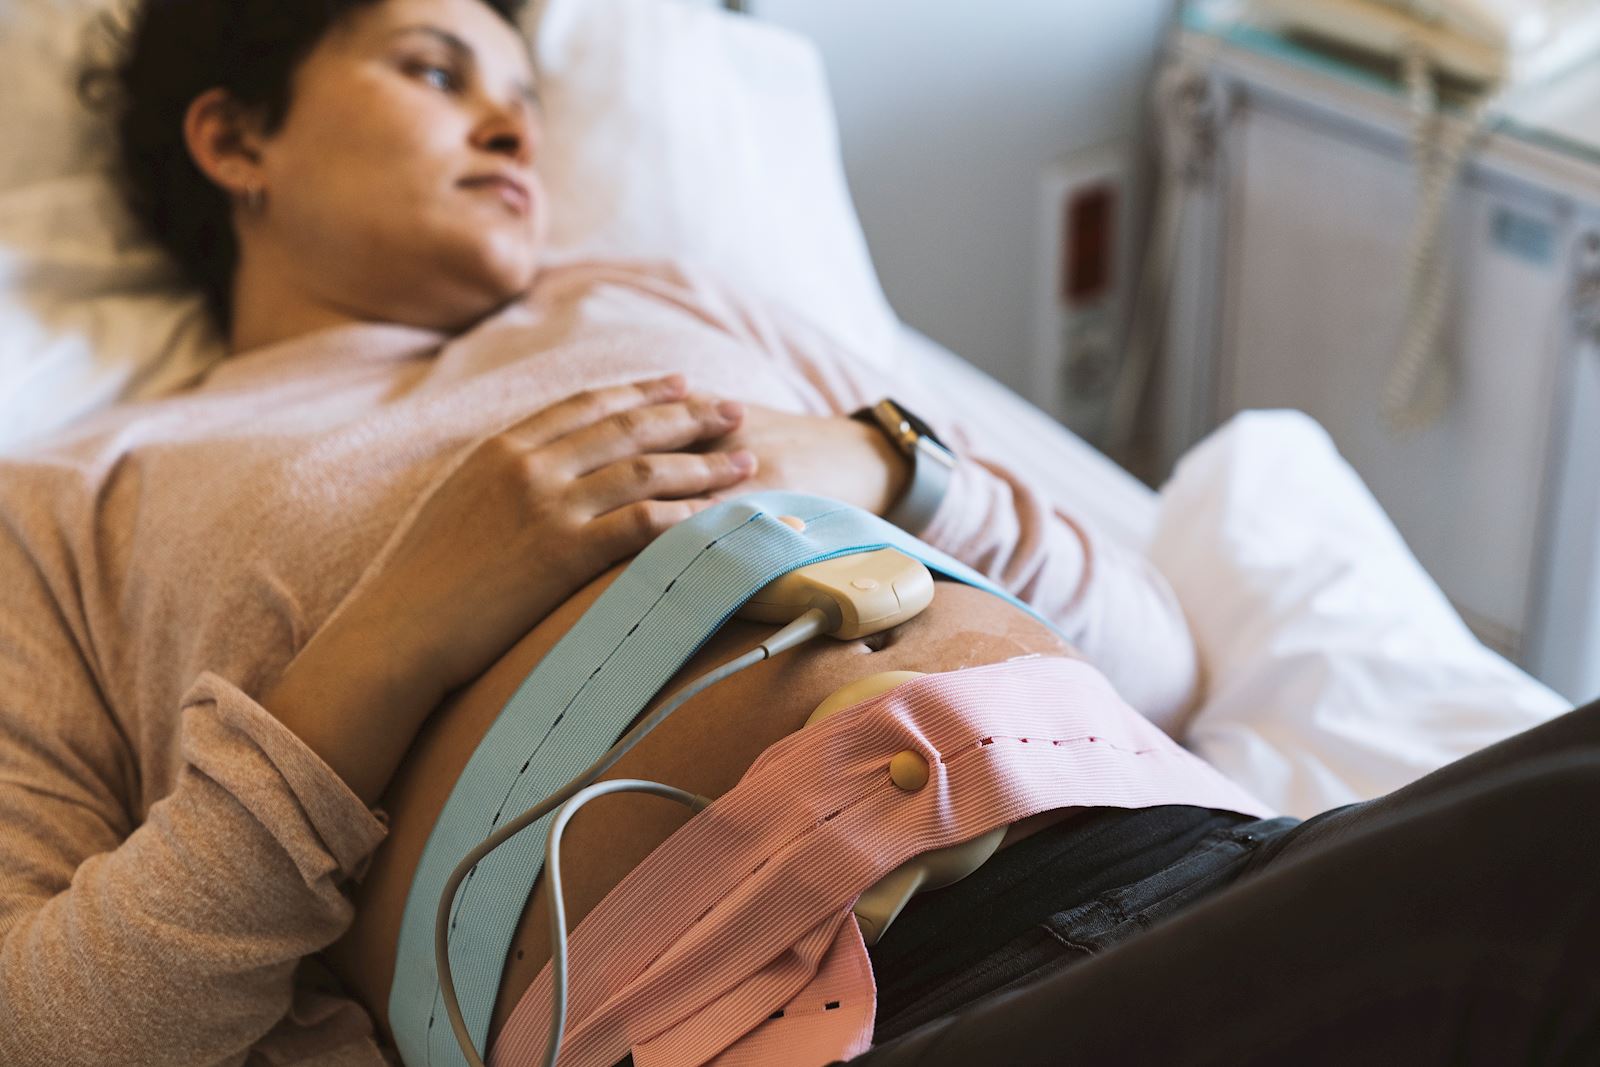 pregnant woman with device on her stomach